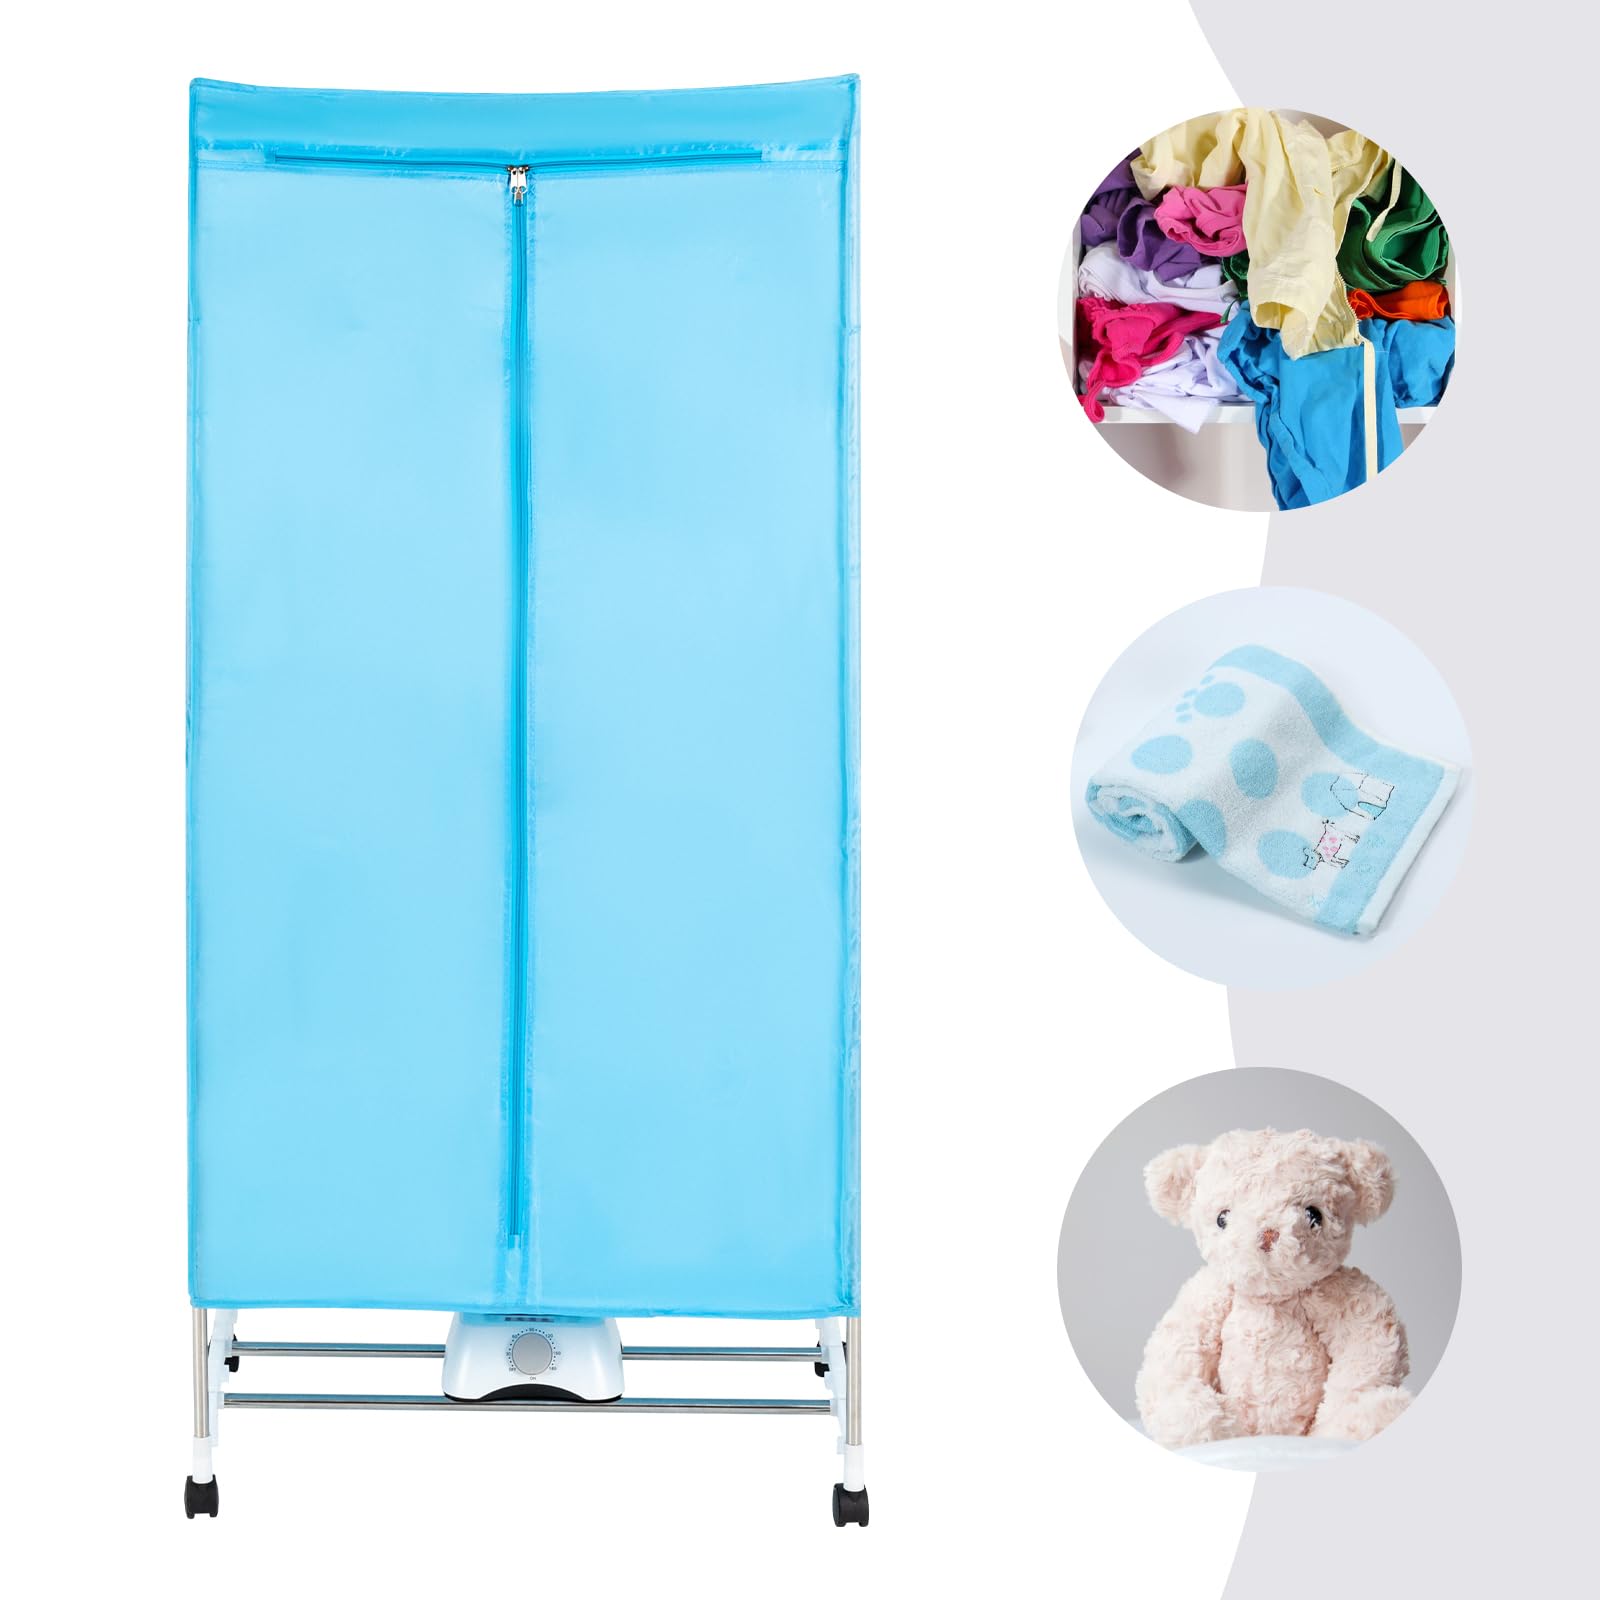 Portable Dryer 110V 1000W Electric Clothes Dryer Machine Fast Garment Dryer Heater 2-Tier Rolling Clothing Drying Rack with Wheels for Home Dorm Hotel Travel, Blue